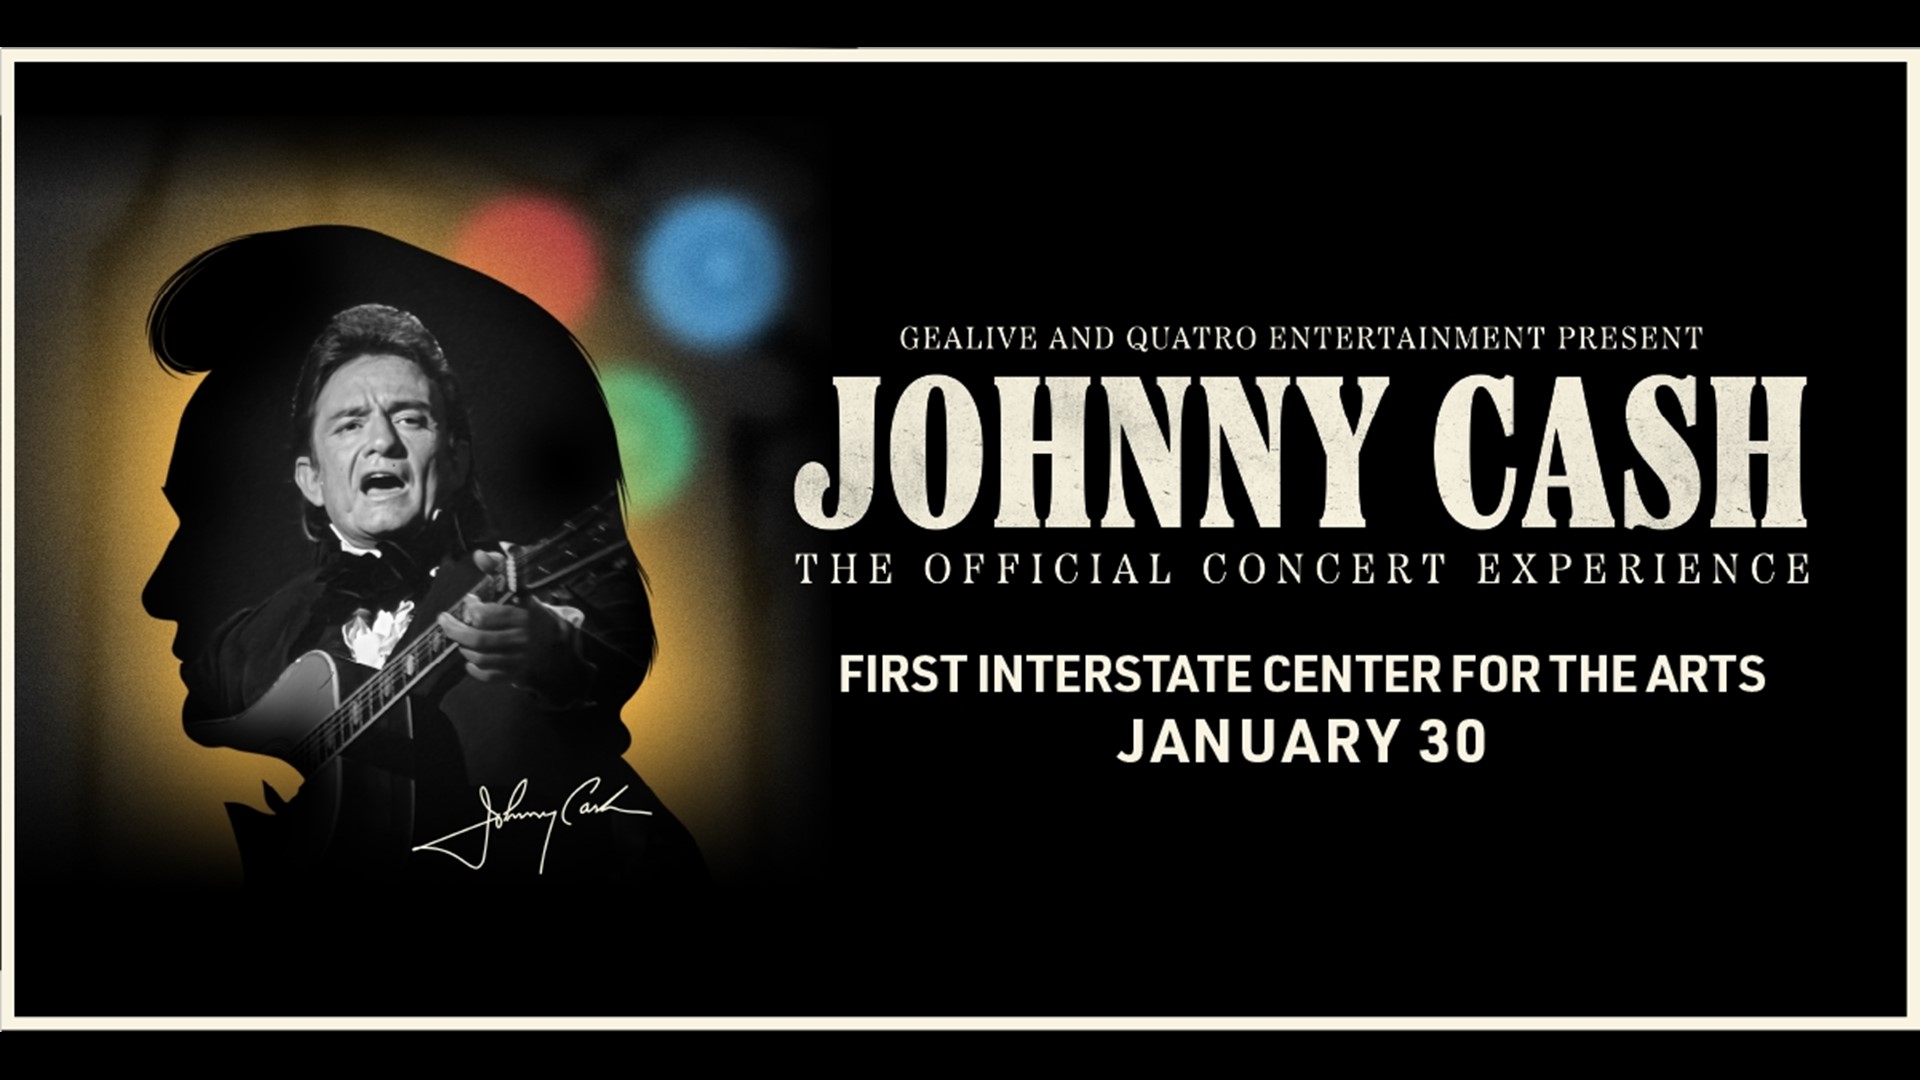 Johnny Cash concert experience coming to Spokane